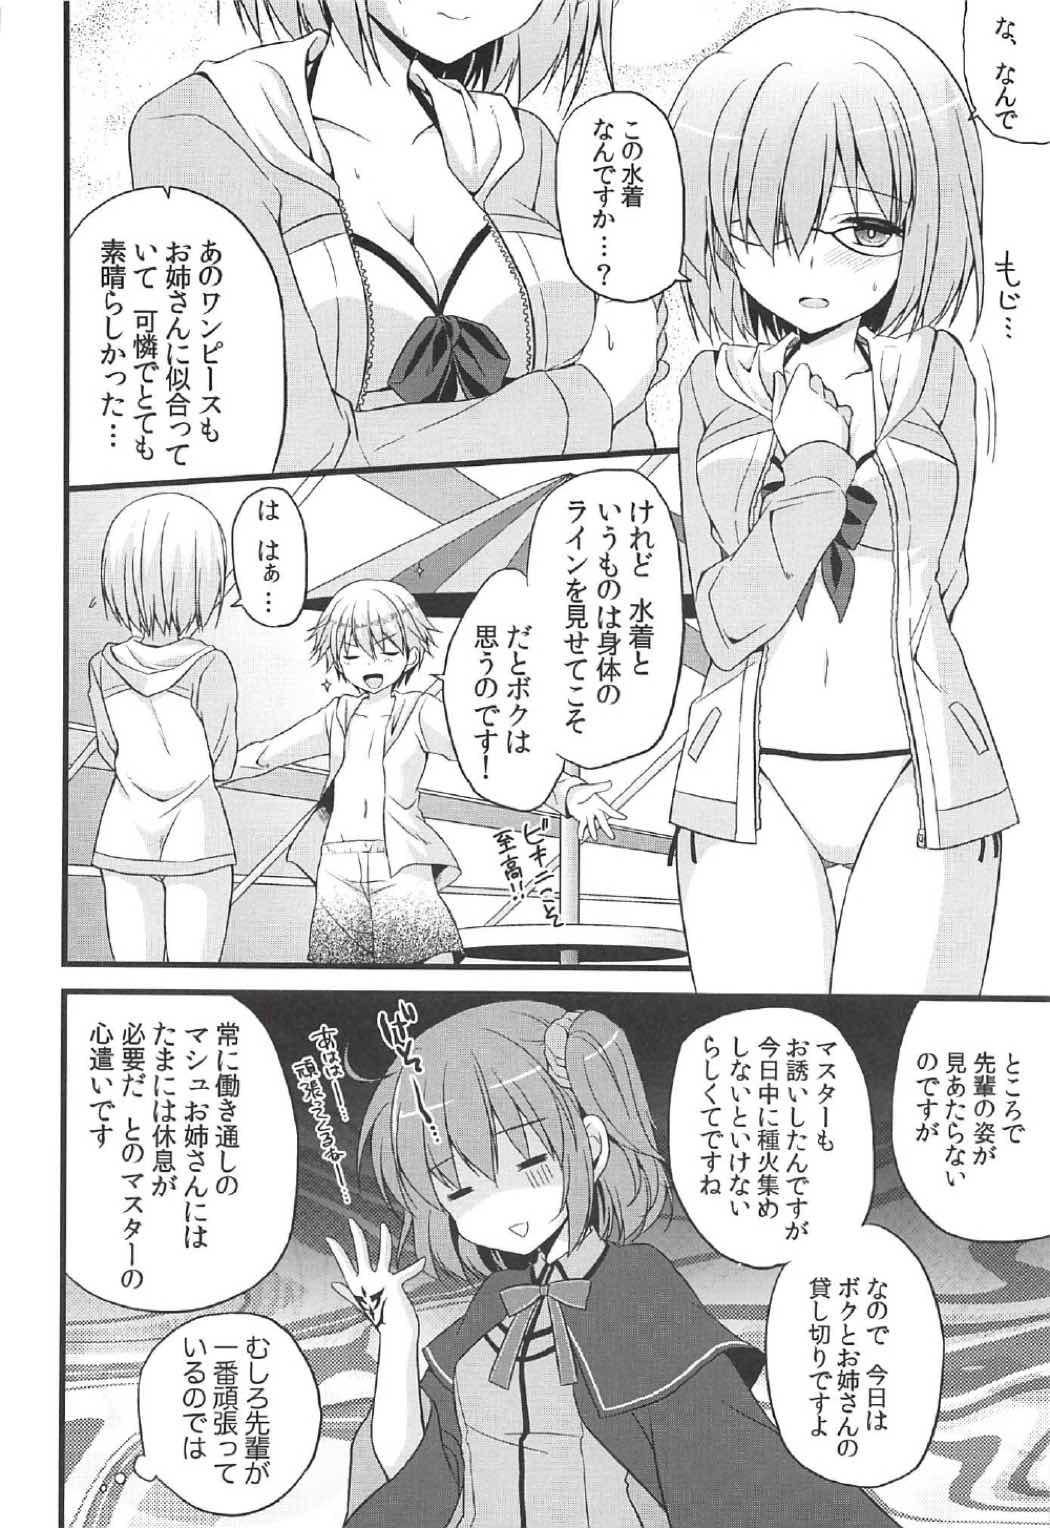 Load Medeyo Nobana - Fate grand order Three Some - Page 5